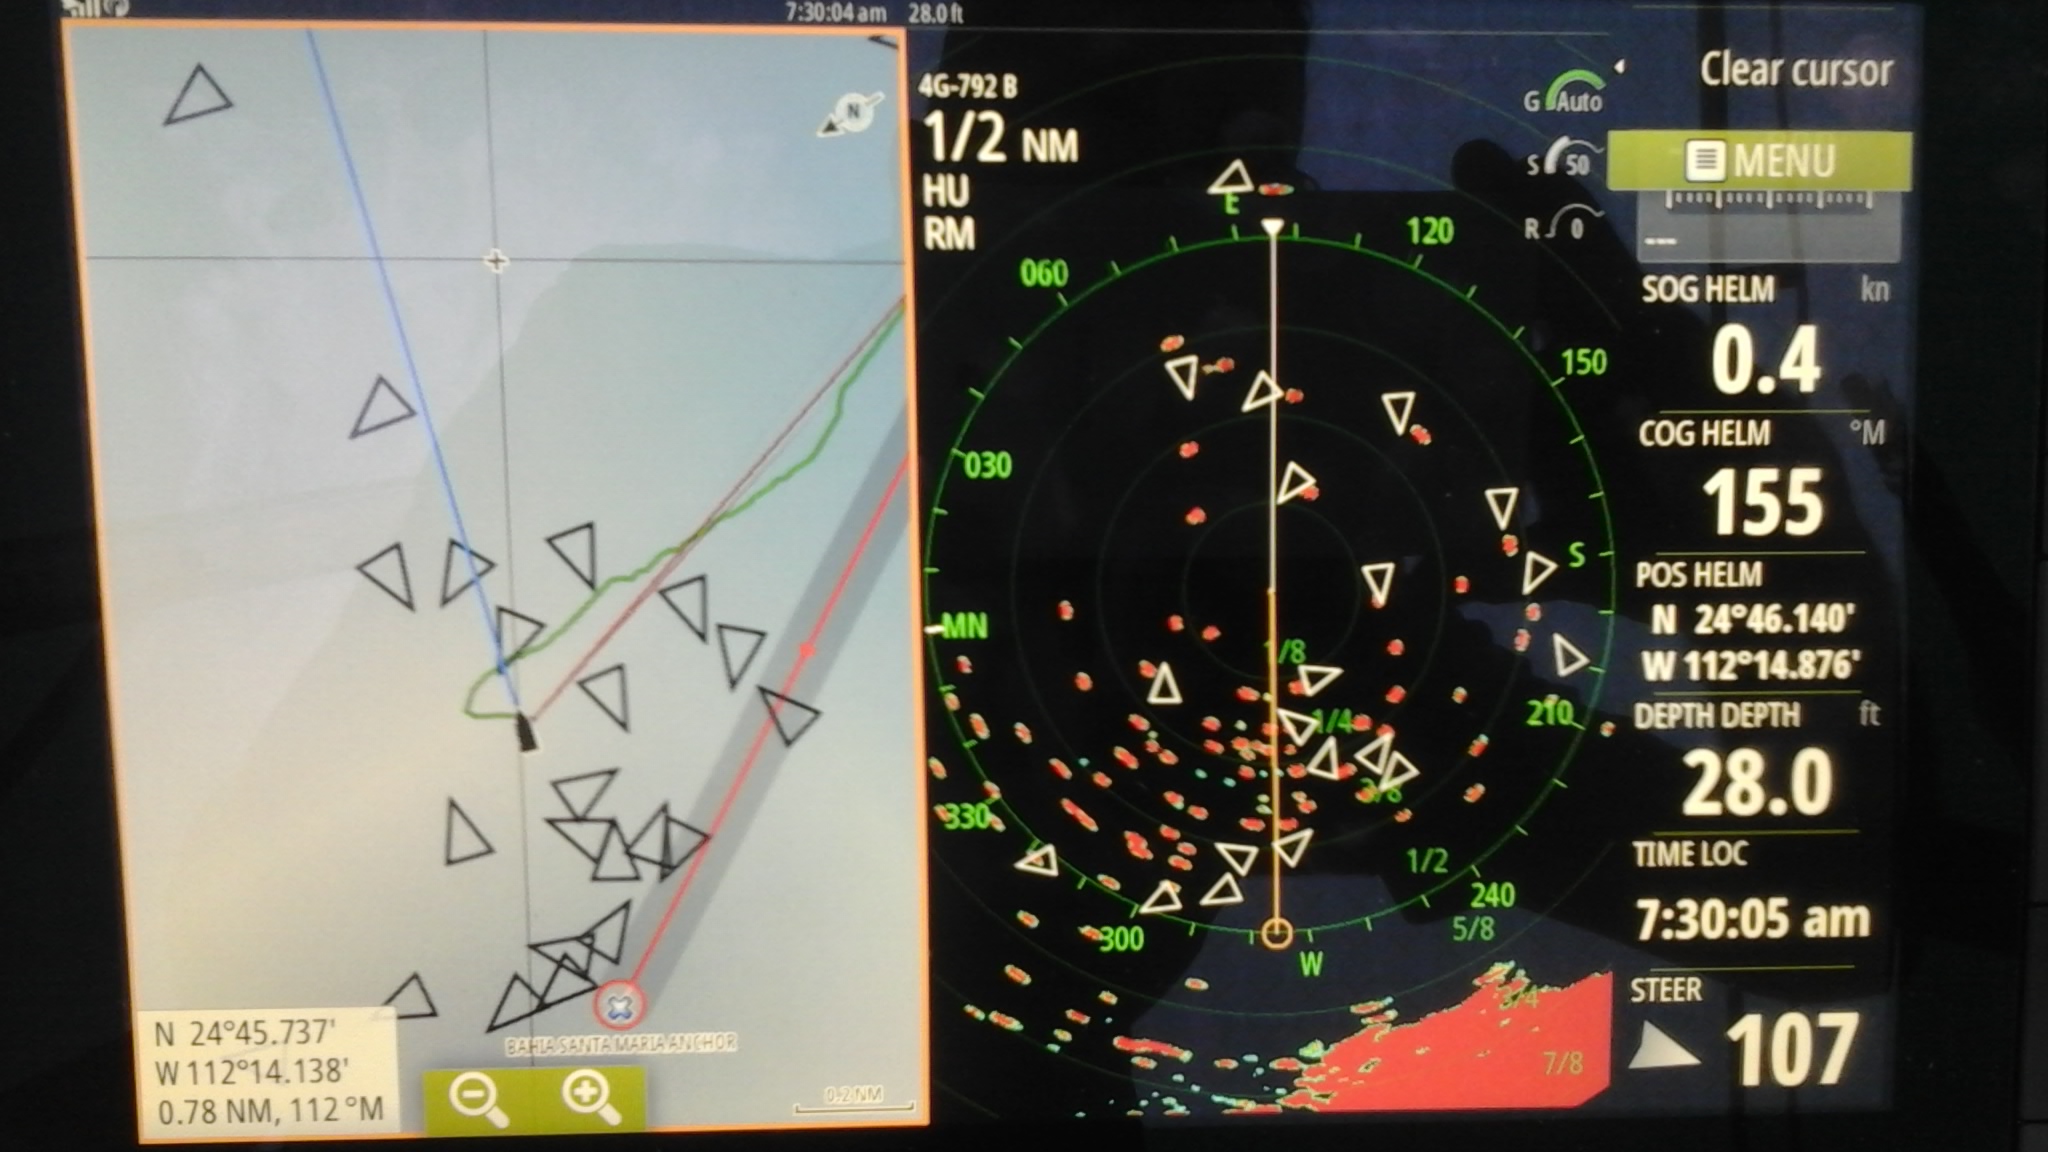 All the triangles are boats, as seen on AIS and radar